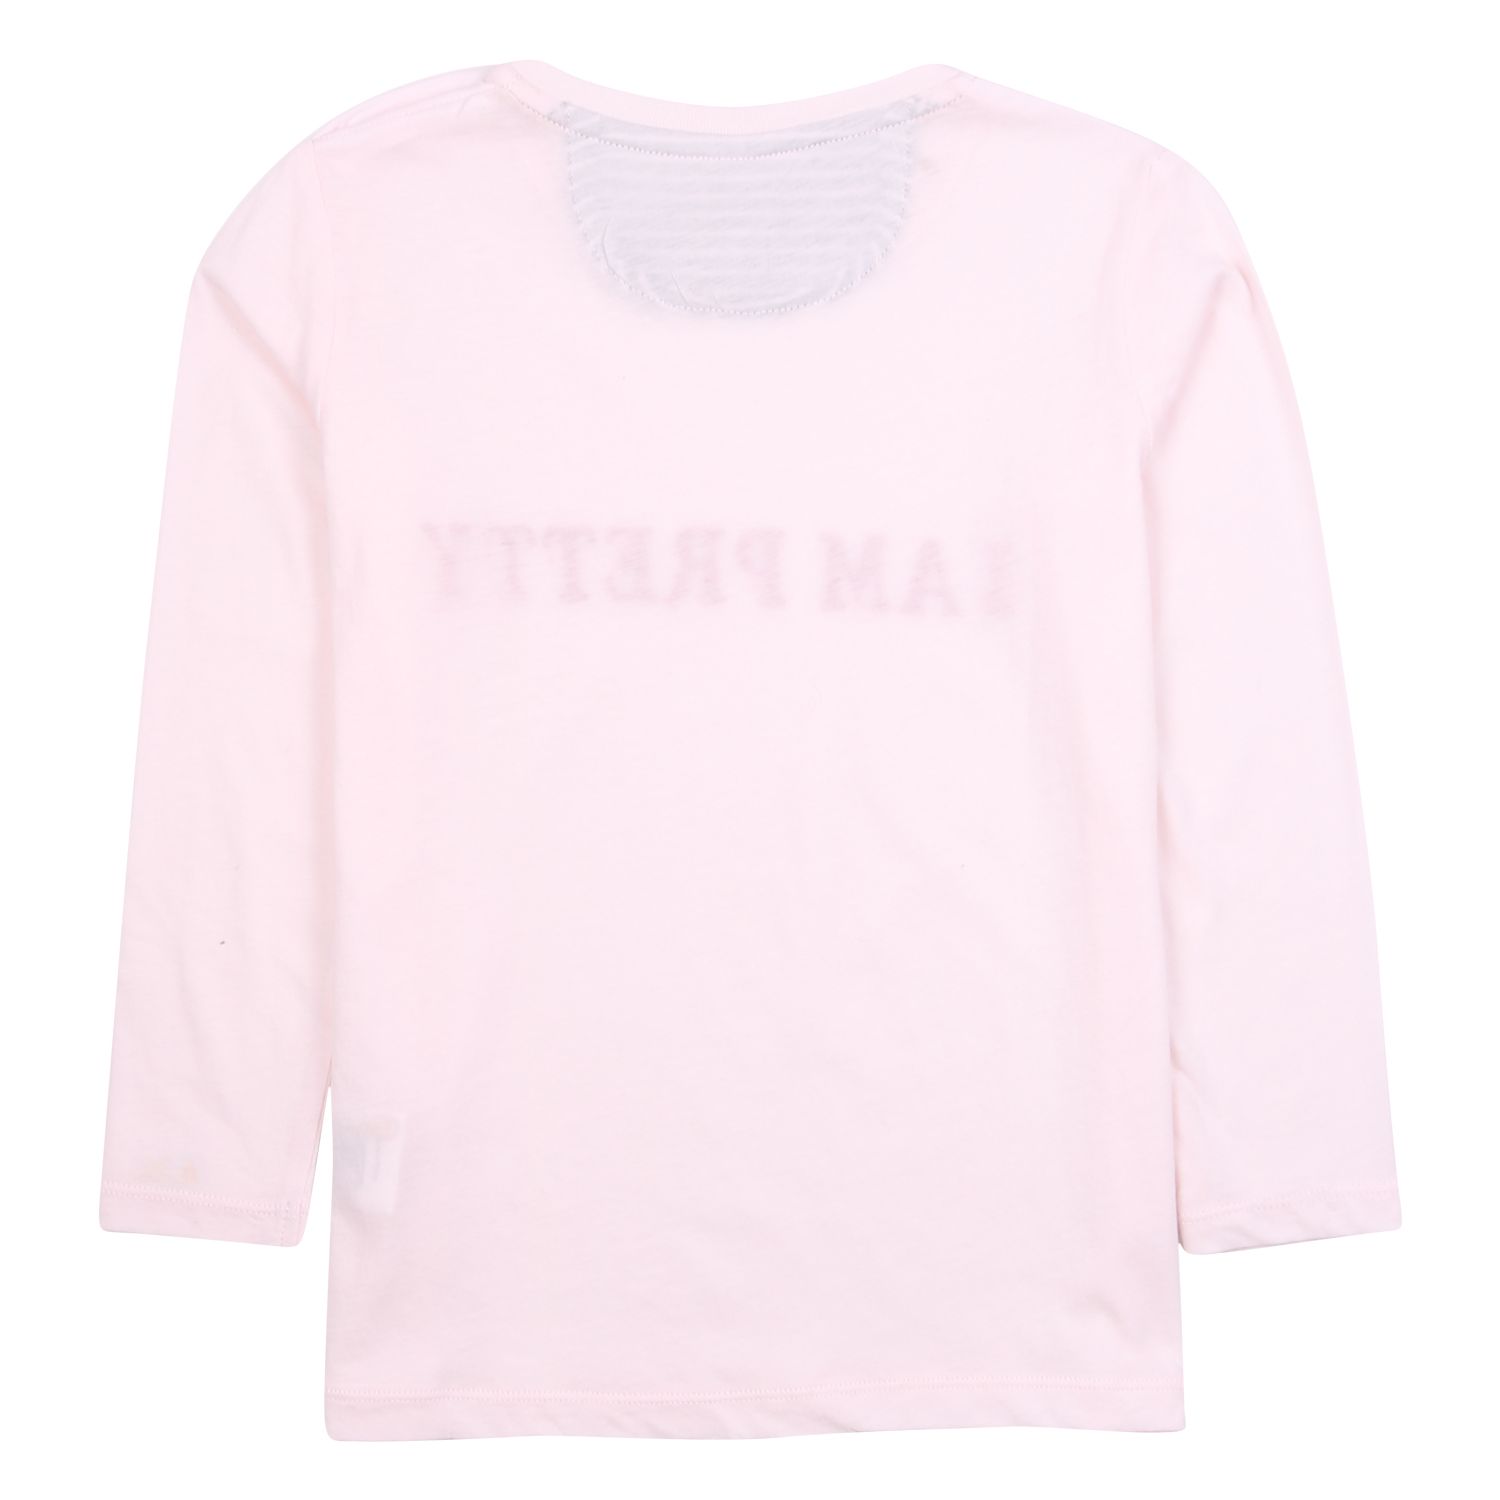 Sun68 pink t-shirt -Details long-sleeved t-shirt, logo on the wrist, round neckline, pink bottom, front with red sewn text in the center, basic back, shoulder closure -Washing max 30 °